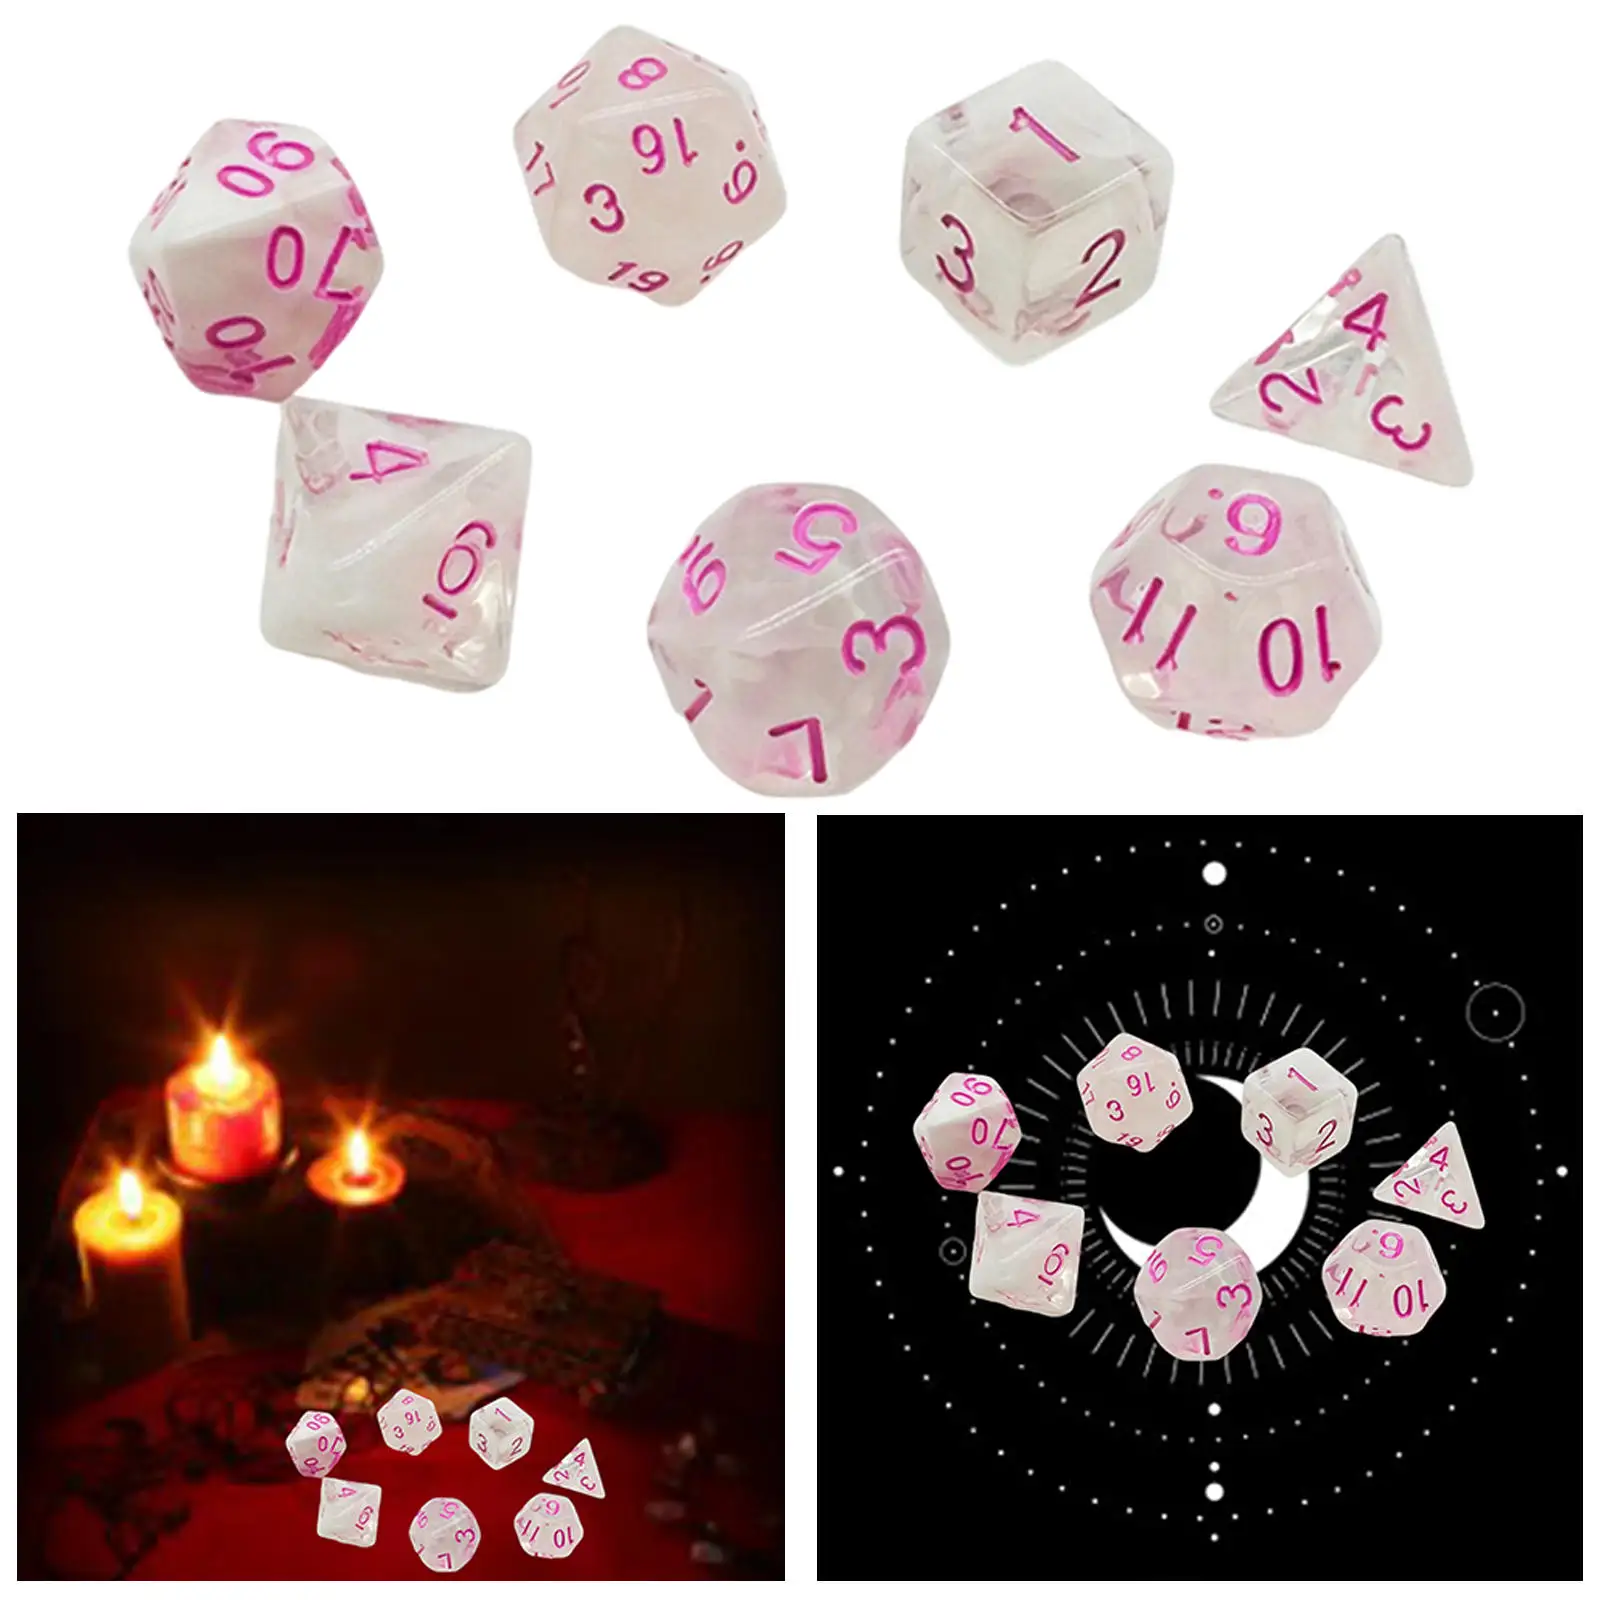 7 Pieces Acrylic Multi Sides Dice TRPG DND Games Board Game Polyhedral Dice for DND RPG MTG Bar Toys War Game Table Game